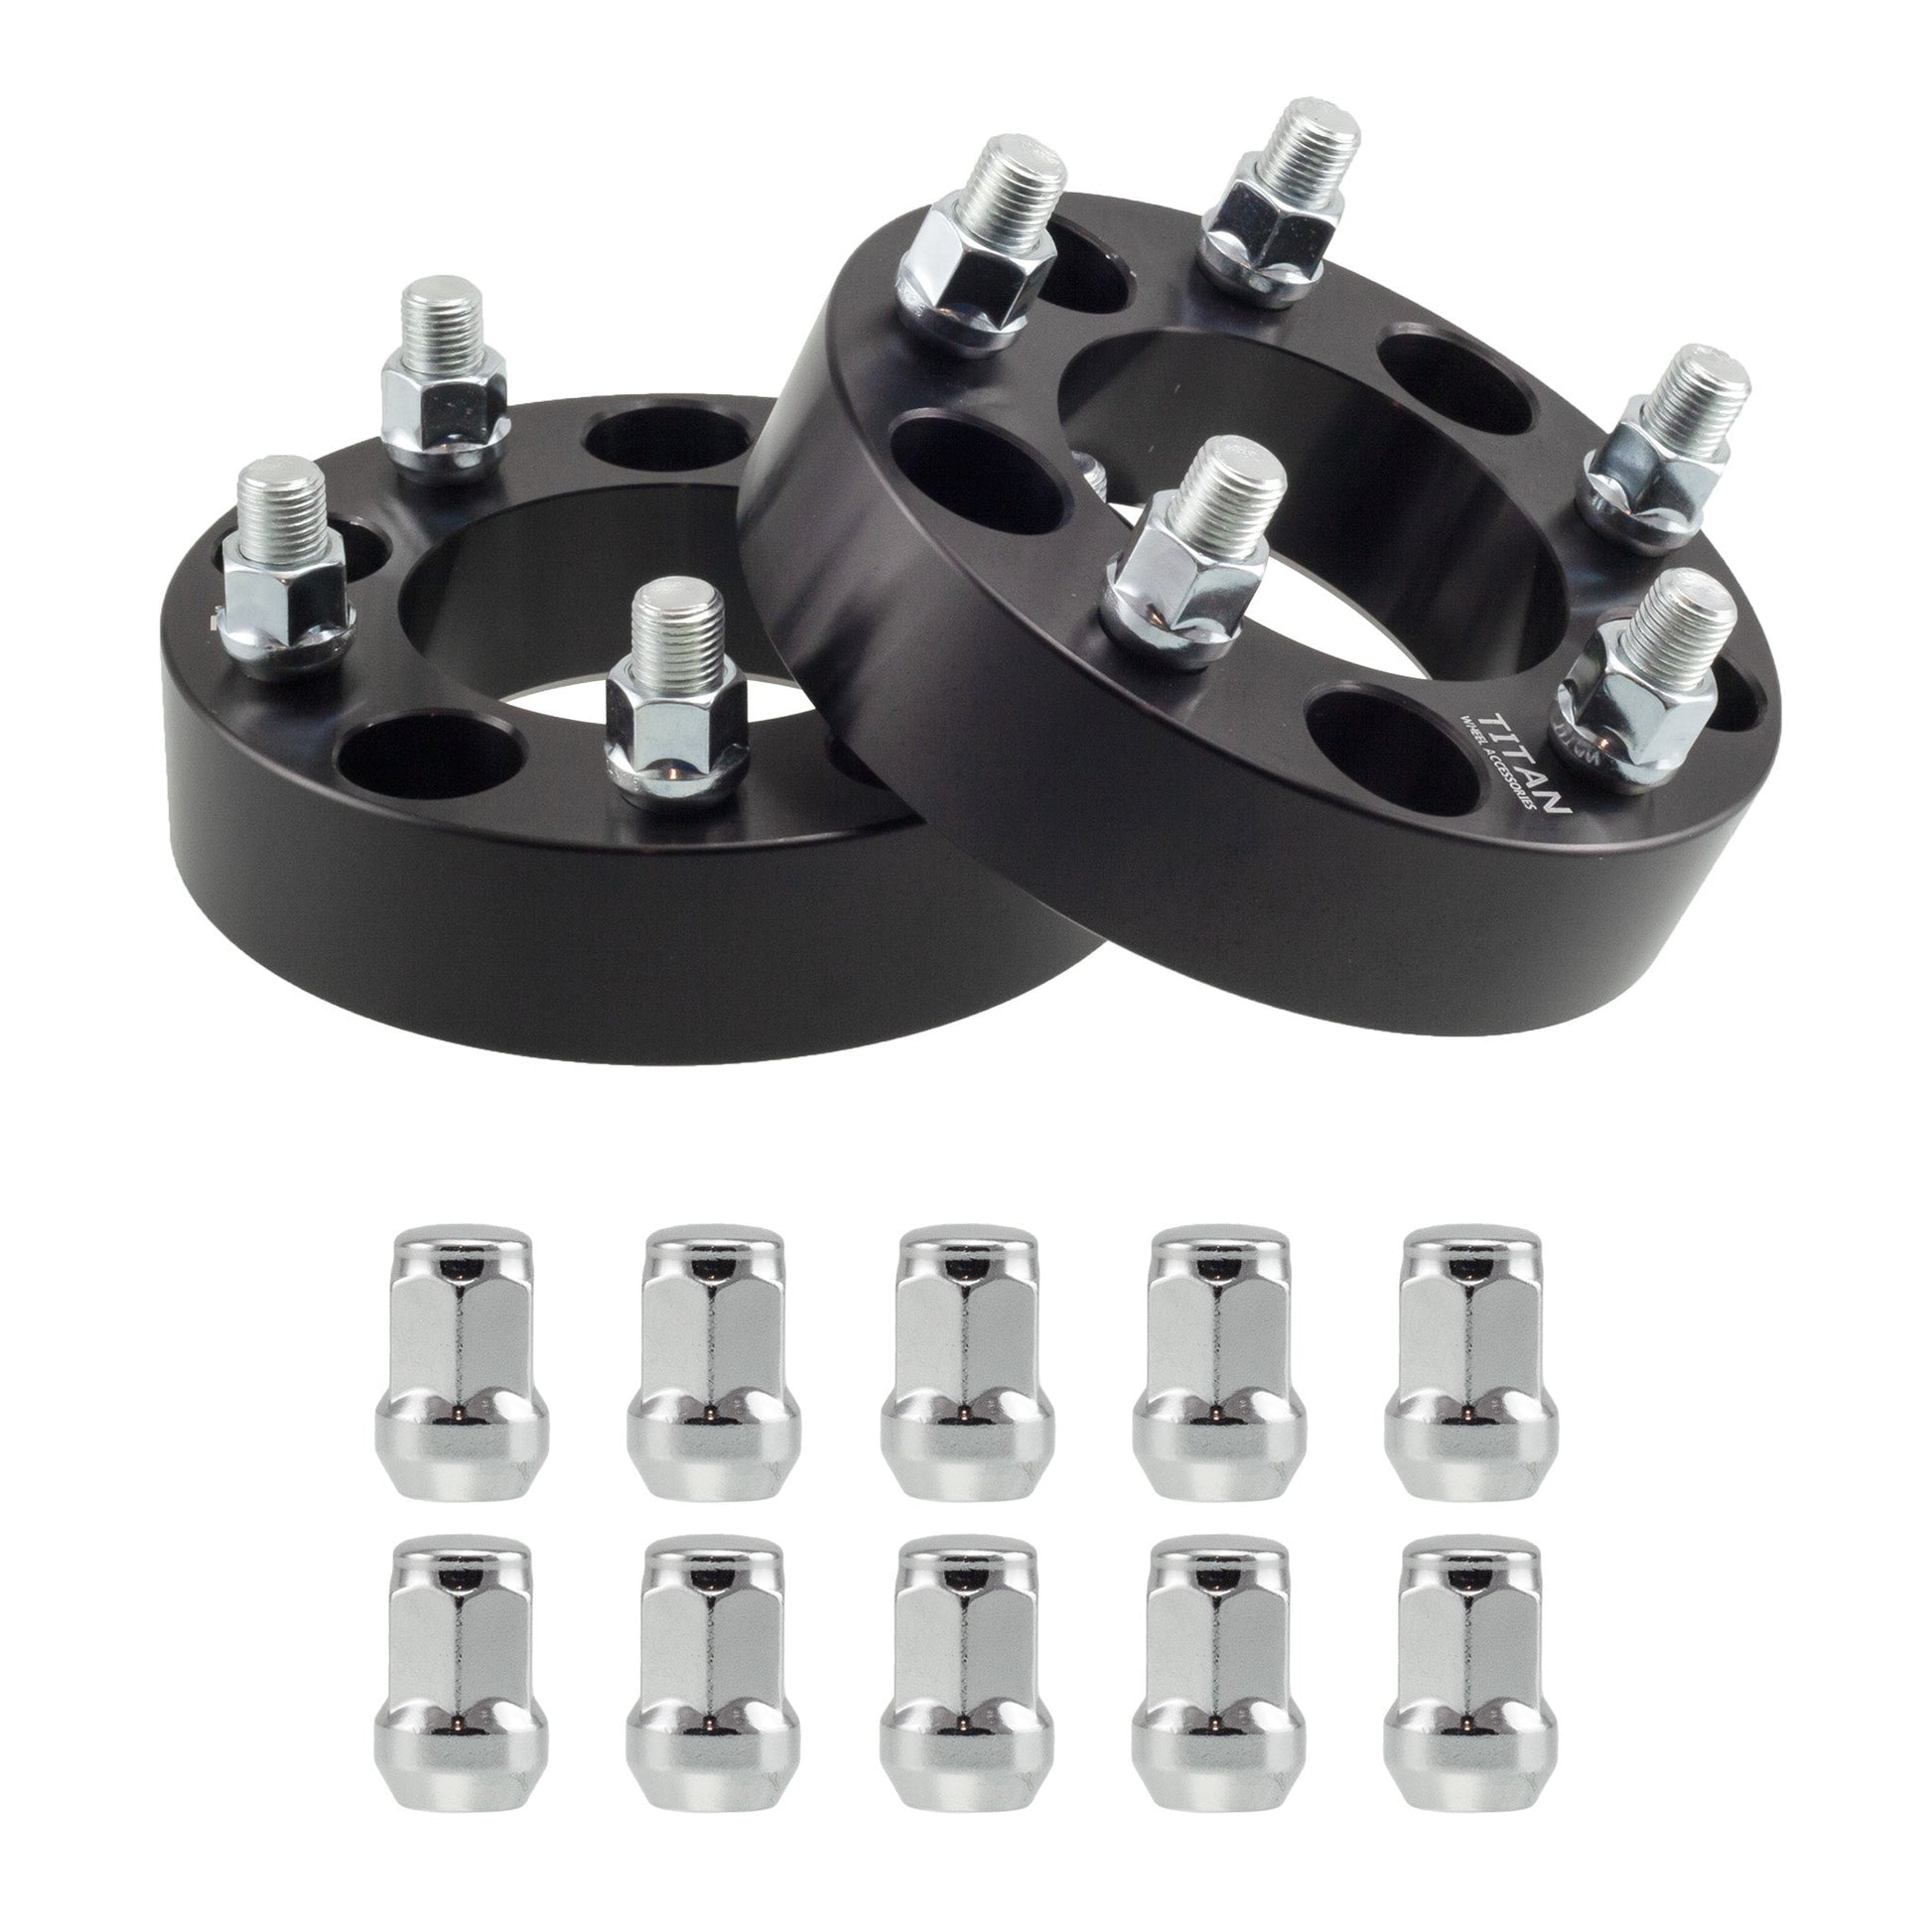 1.25" (32mm) Titan Wheel Spacers for Ford Mustang Ranger Edge Explorer | 5x4.5 (5x114.3) | 70.5 Hubcentric |1/2x20 Studs | Titan Wheel Accessories